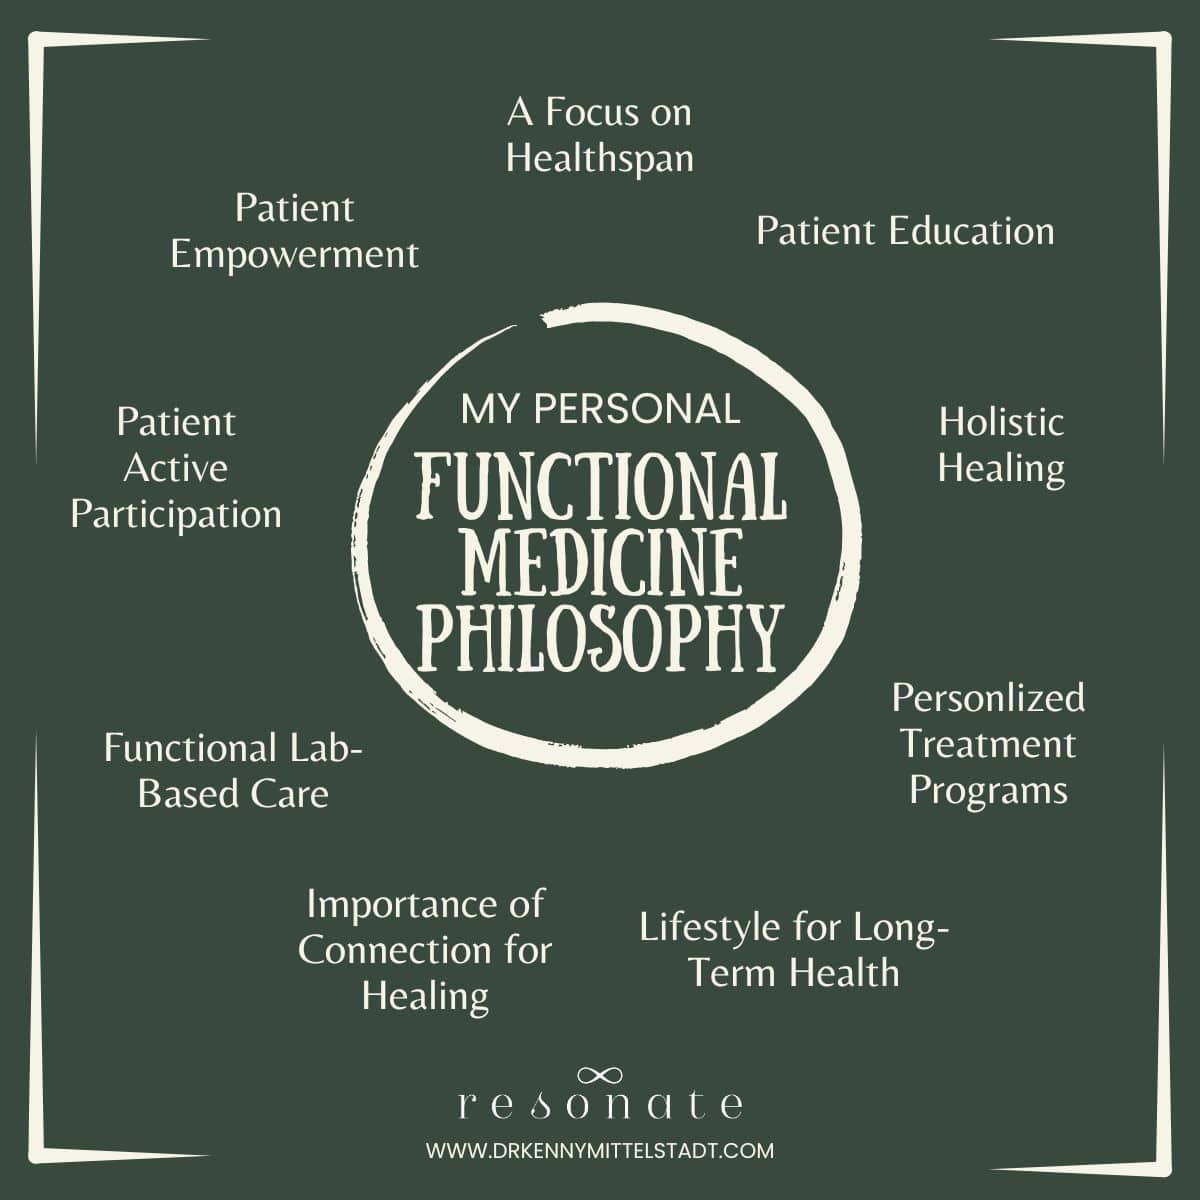 This image depicts a summary of each of the components of Dr. Kenny's personal functional medicine philosophy.  From personalized, lab-based treatment programs, holism, the important of lifestyle for long term healing, and patient empowerment - each of these and more are discussed in the blog post body.